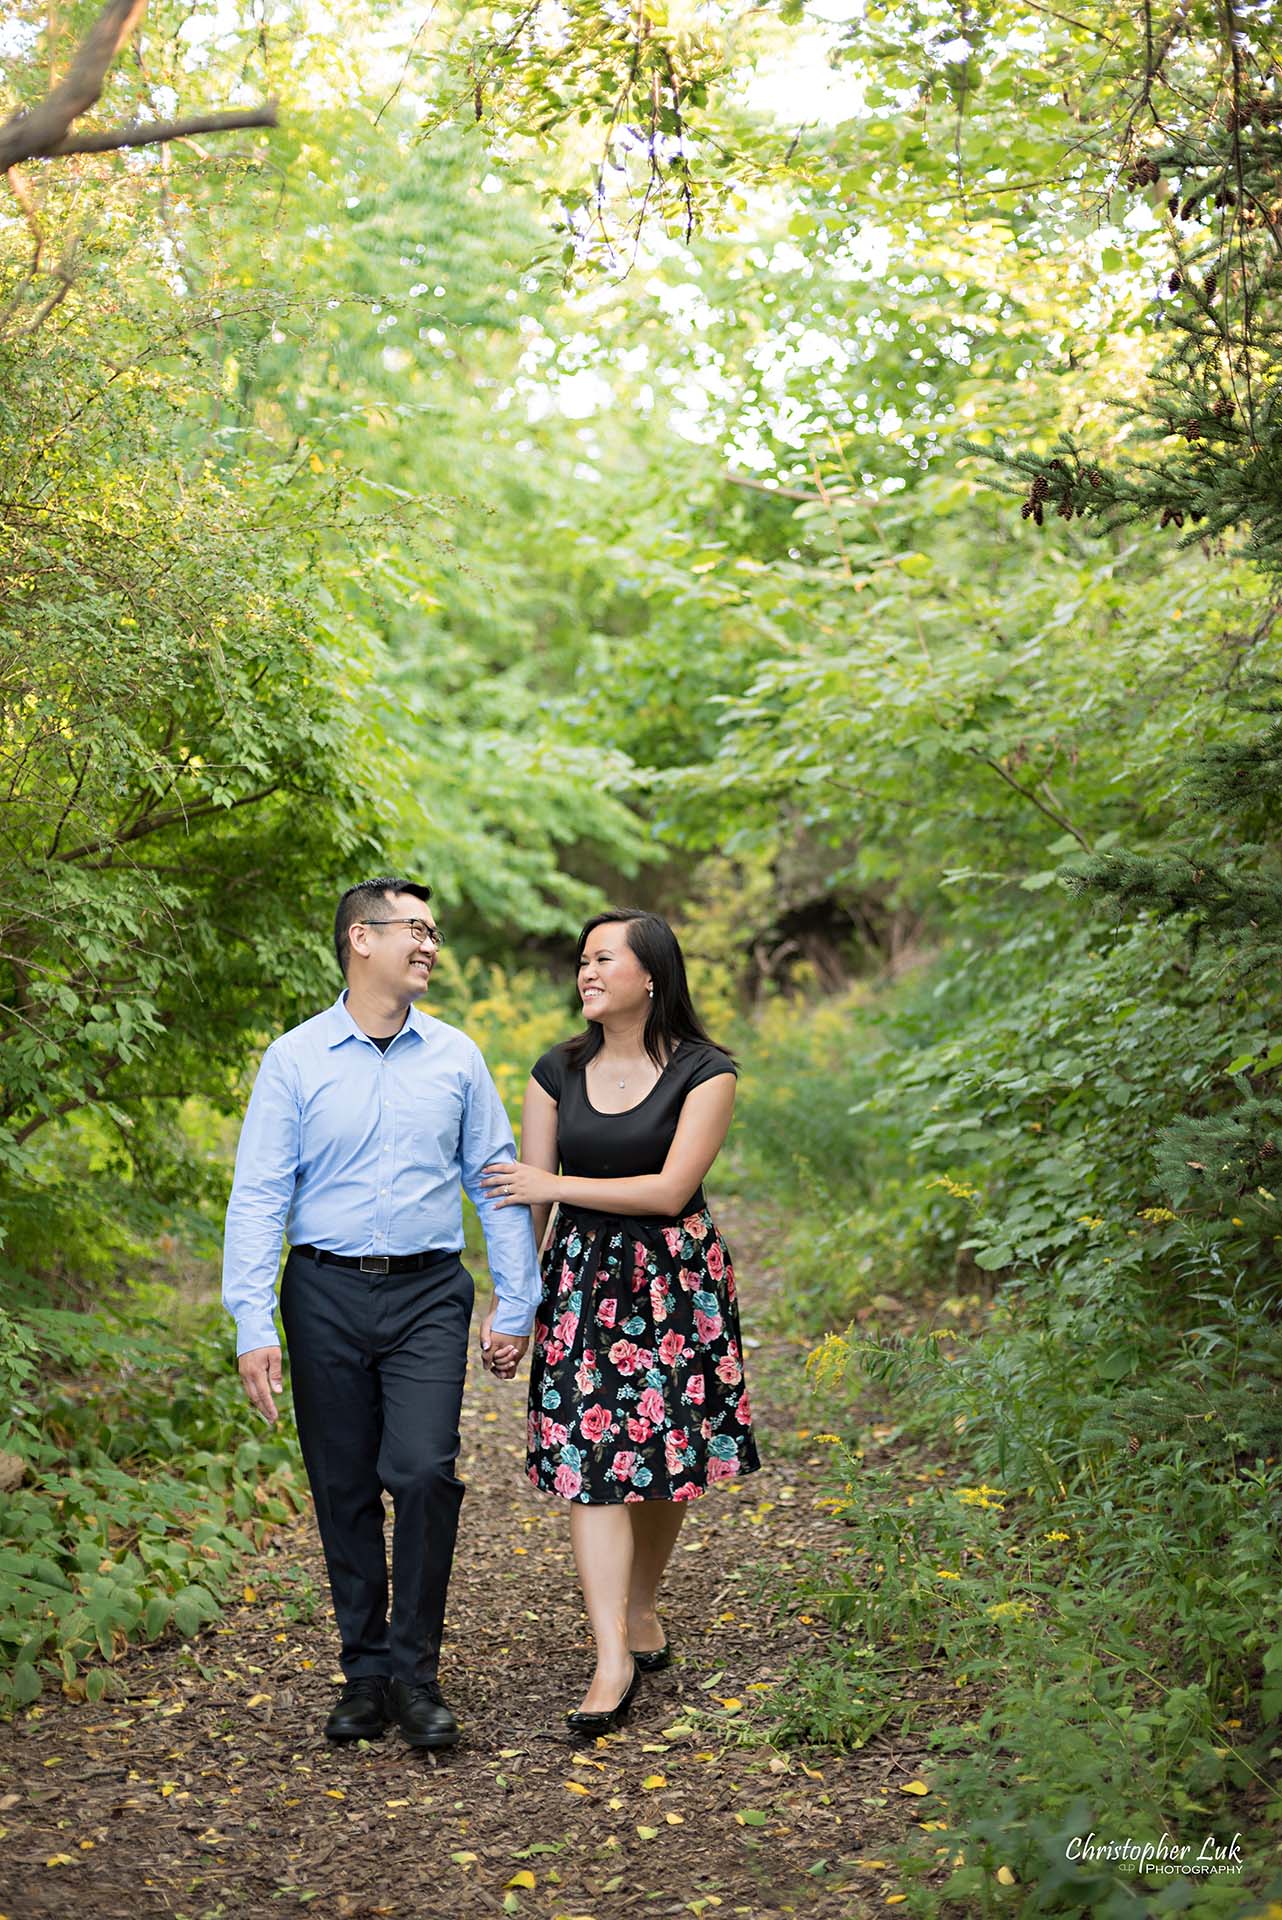 Christopher Luk Toronto Wedding Family Event Corporate Commercial Headshot Photographer Edith Jeff Engagement Session Alexander Muir Memorial Gardens Park MidTown Photo Location Natural Candid Photojournalistic - Bride and Groom Walking Forest Pathway Hug Arms